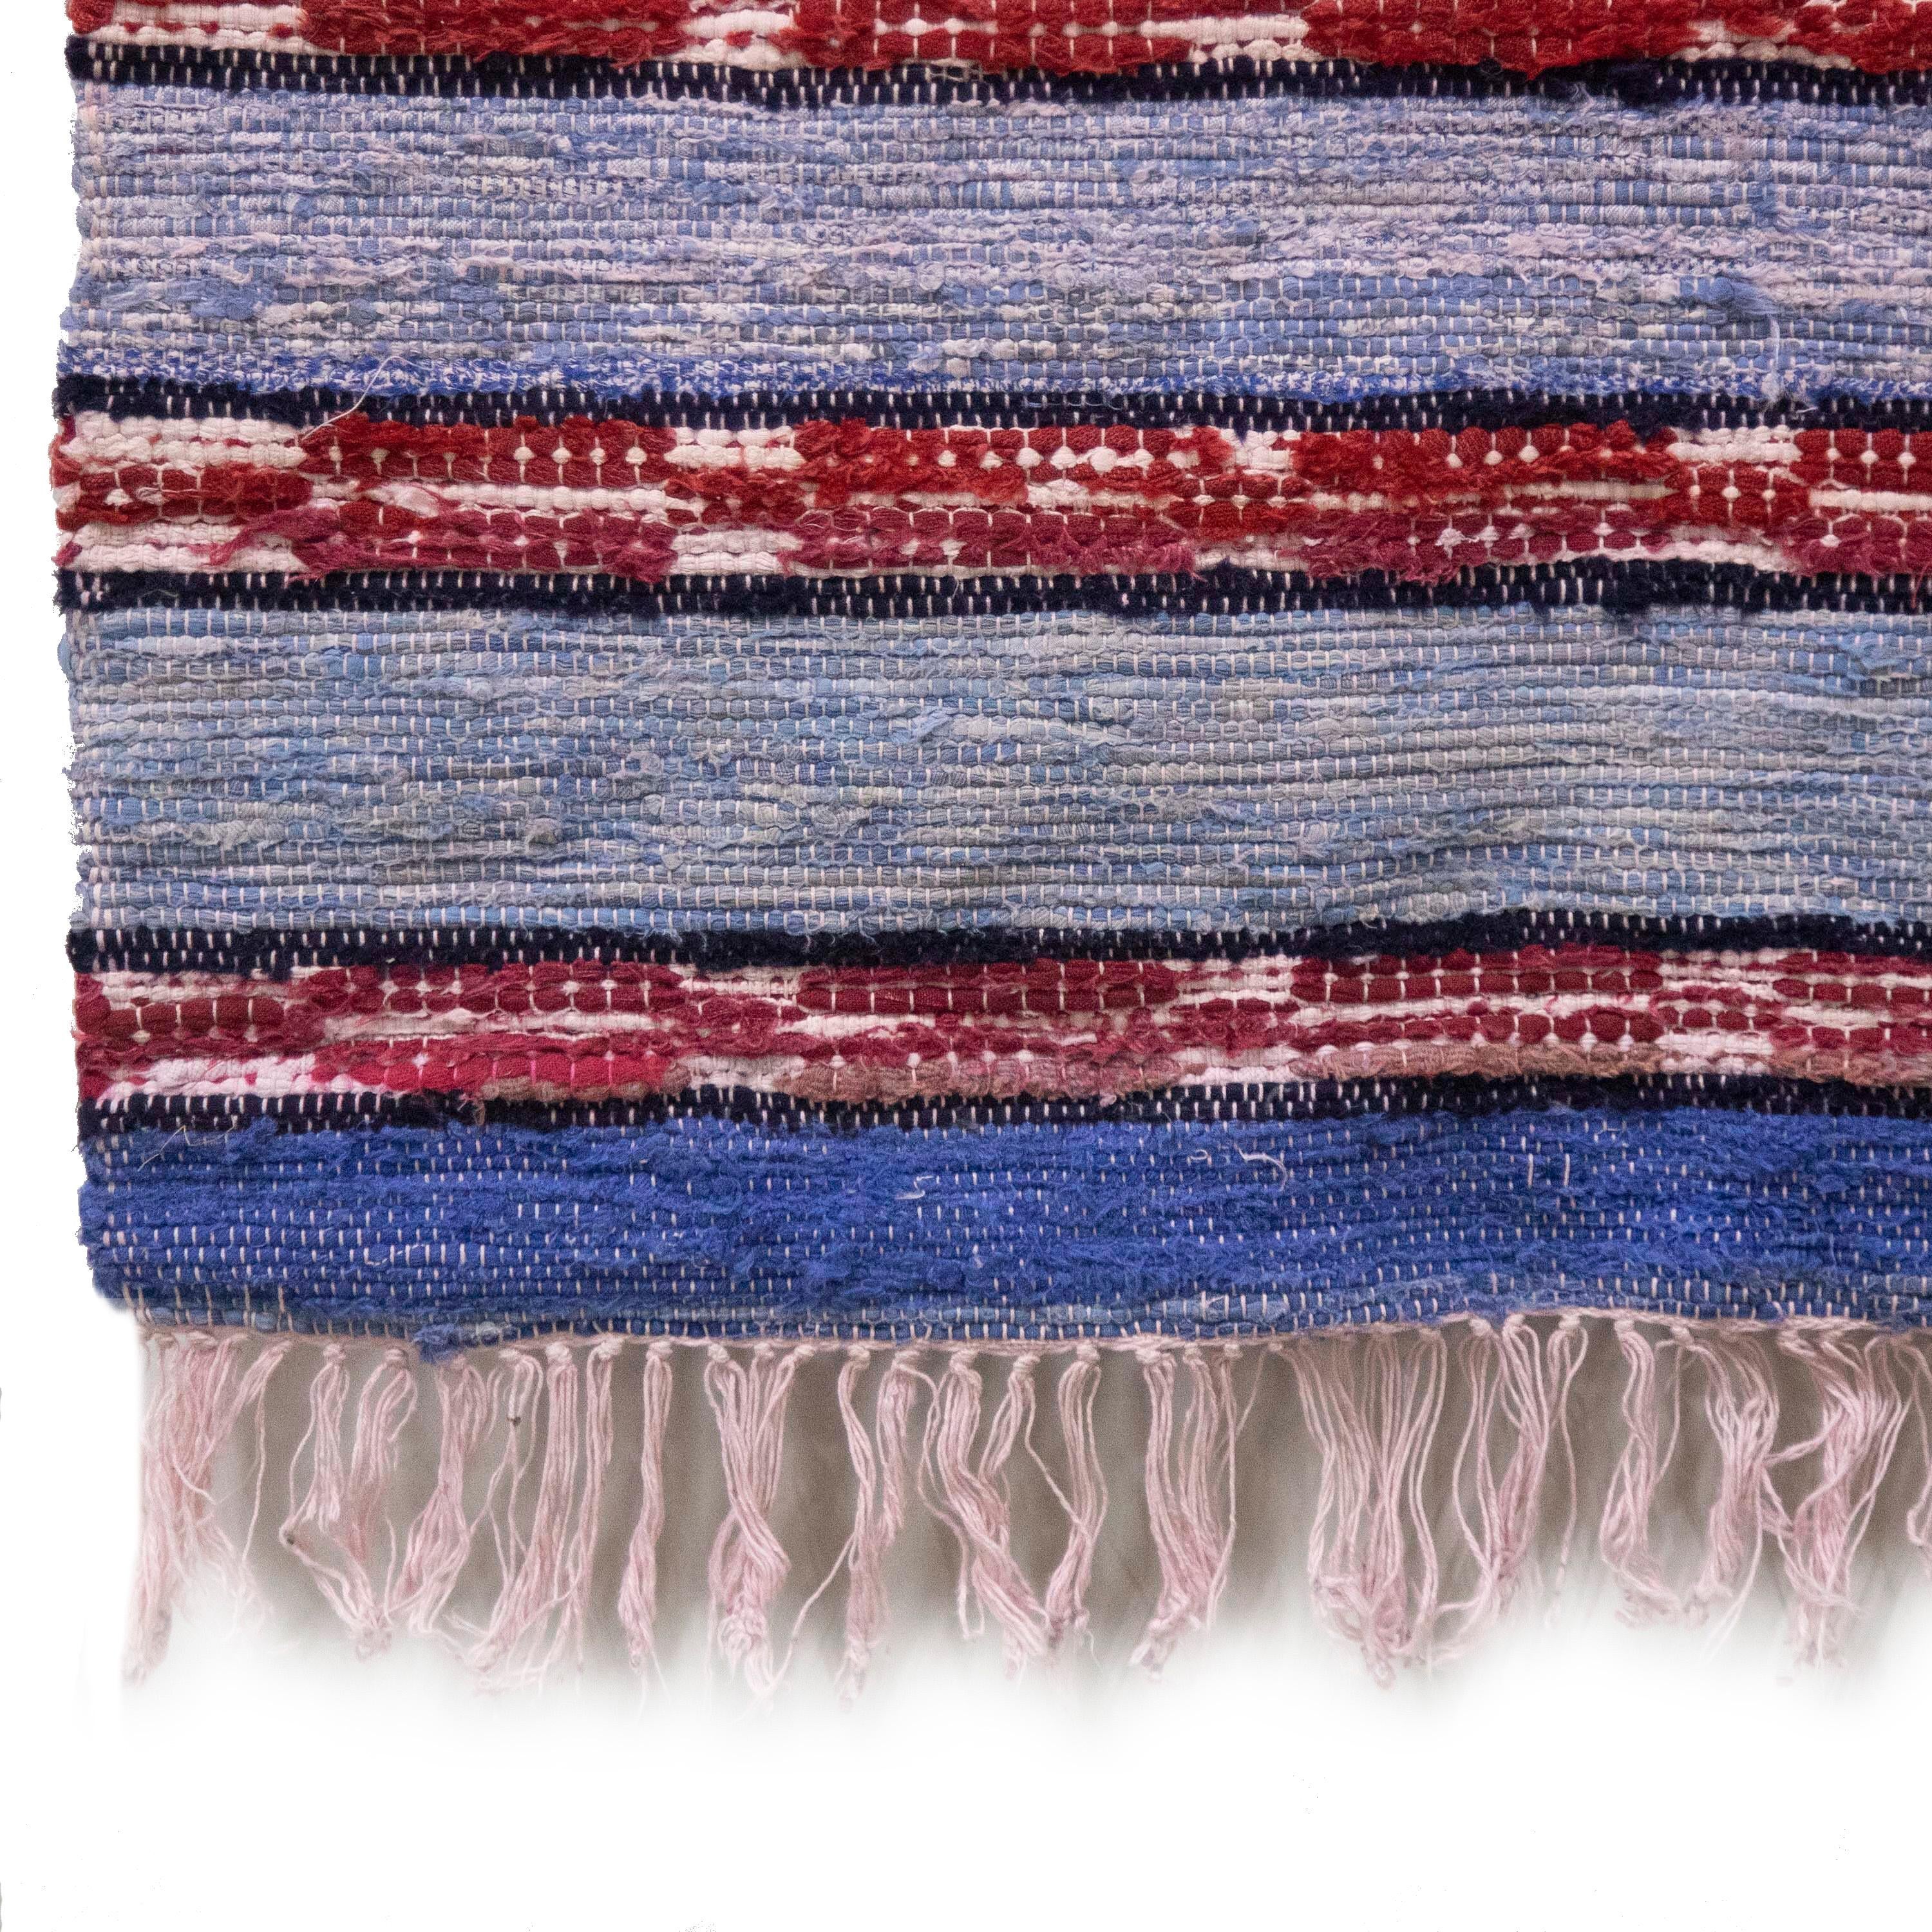 20th Century Swedish rag rug. Featuring a large stripe design throughout in tones of purple, blue and red. This rug can be machine-washed at 30 degrees.
RT6024489